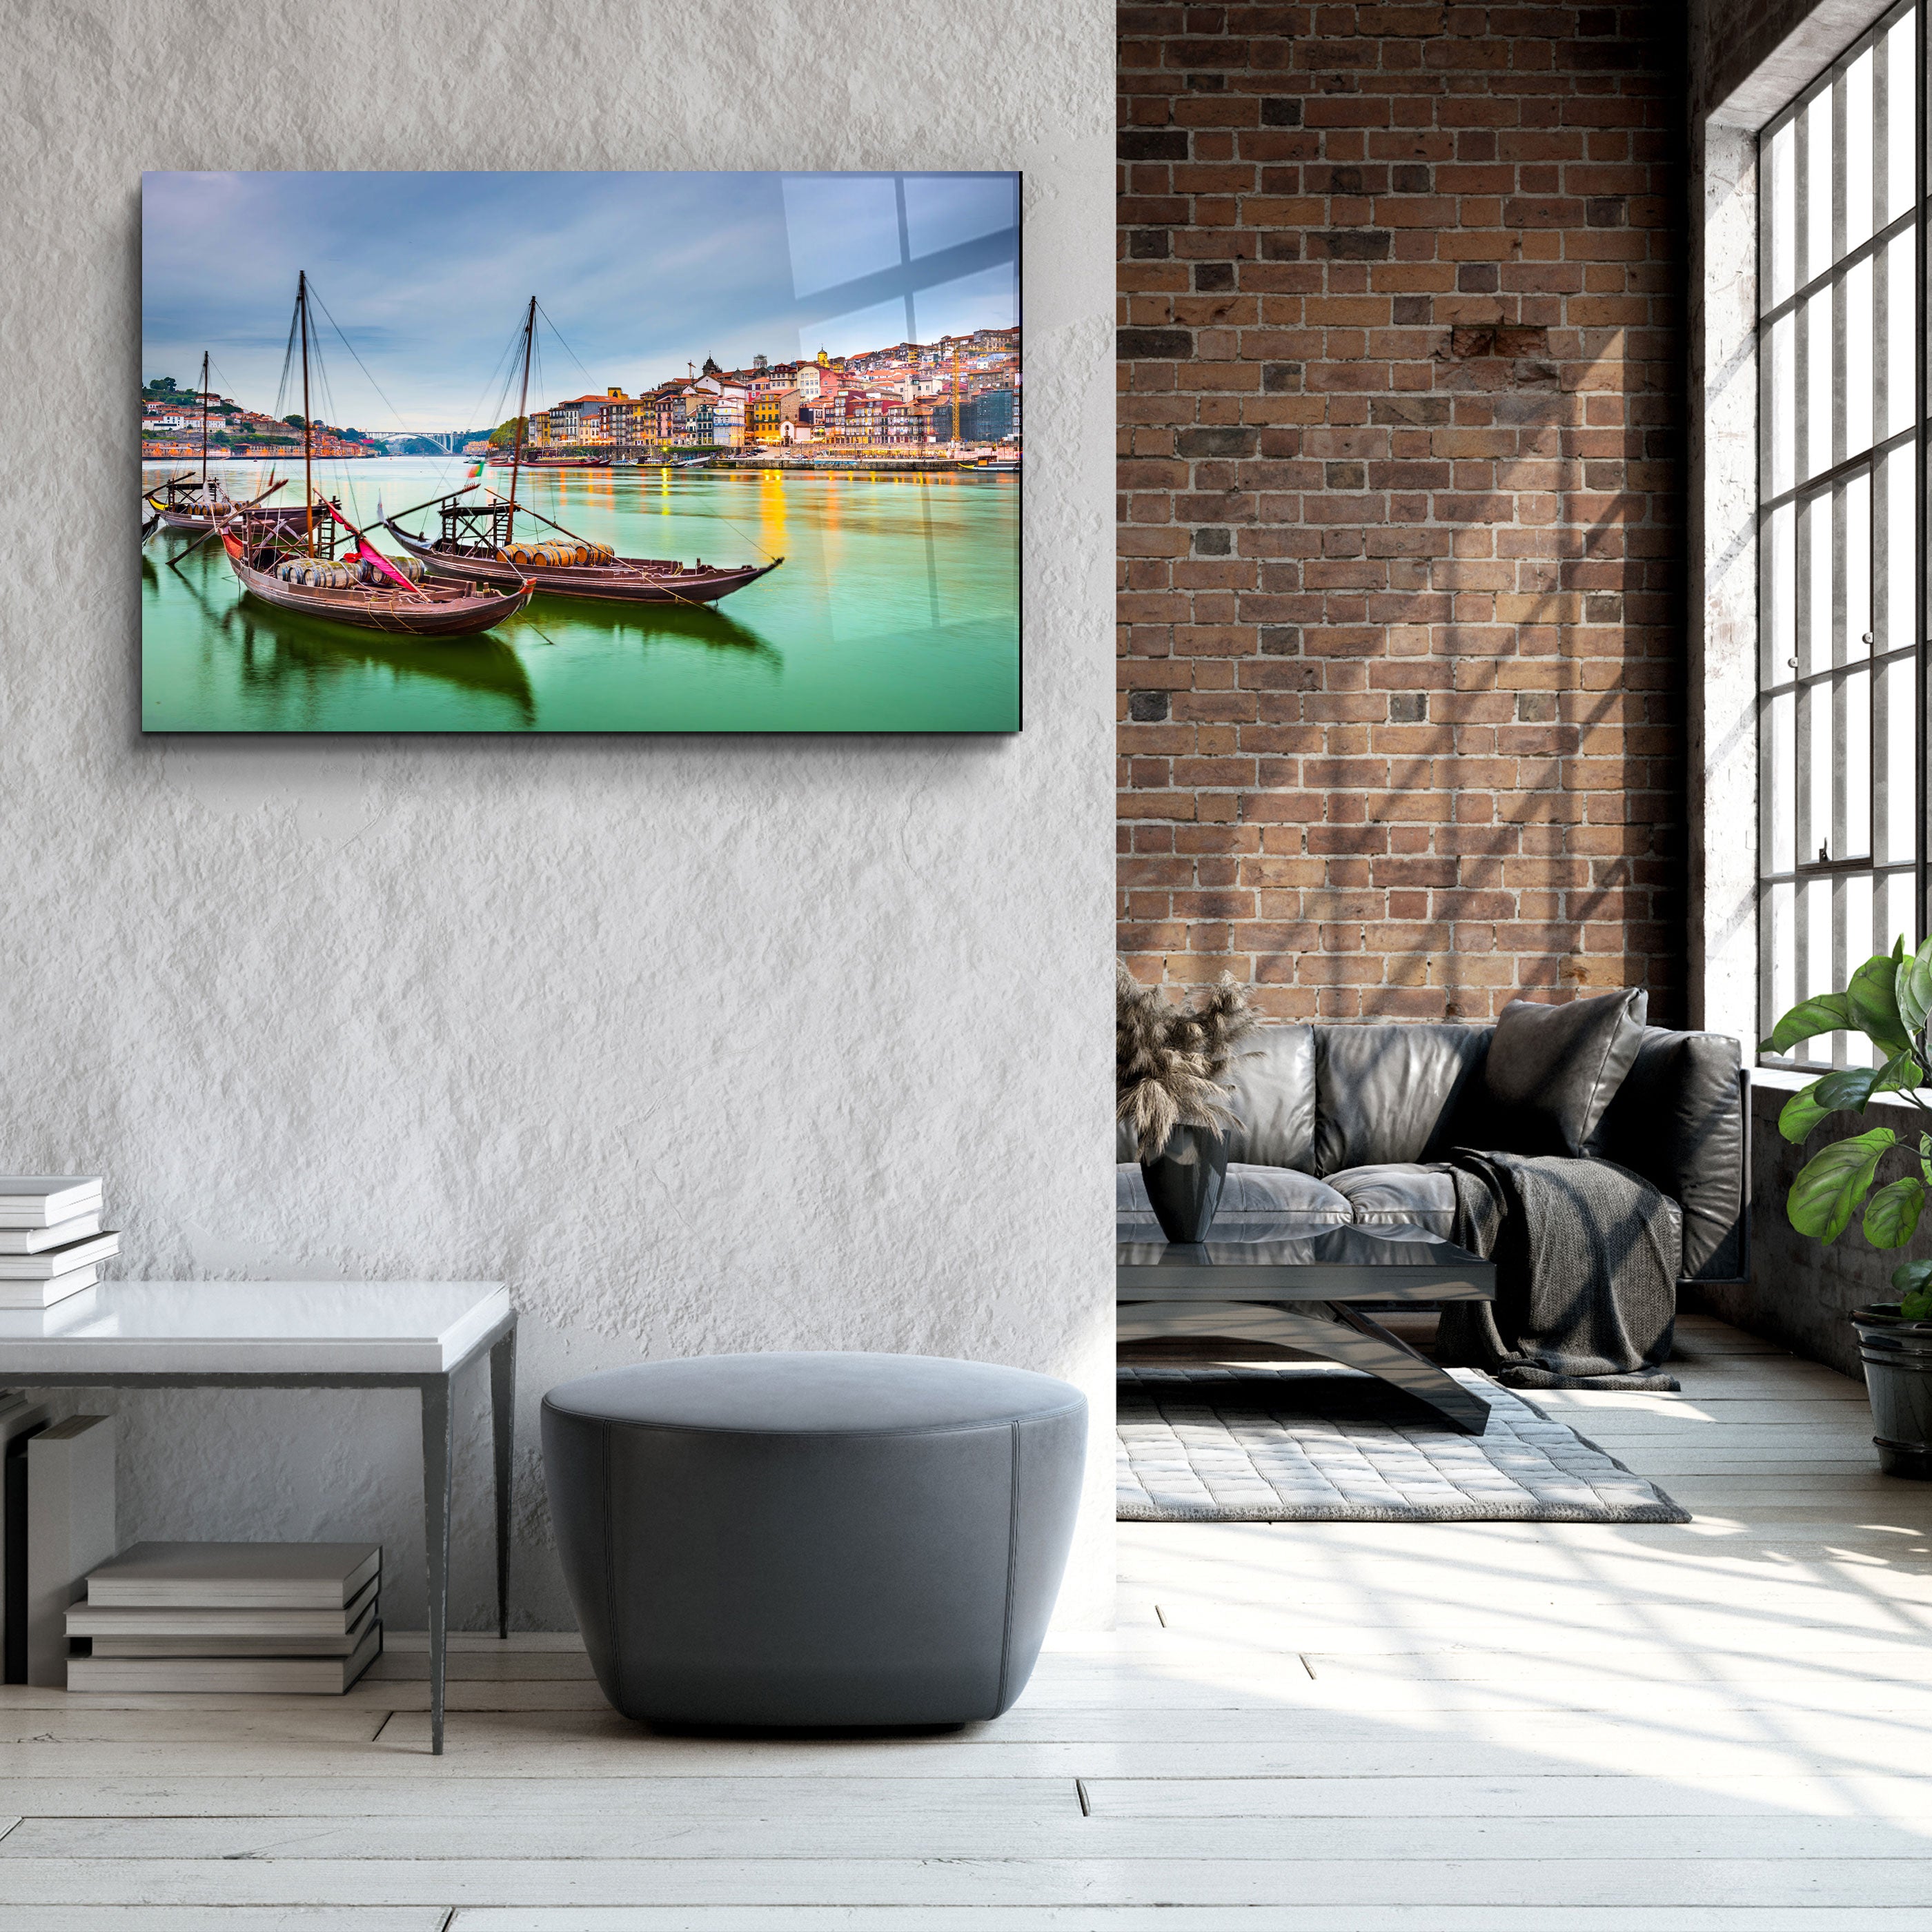 ・"Porto, Portugal old town cityscape on the Douro River with traditional Rabelo boats."・Glass Wall Art